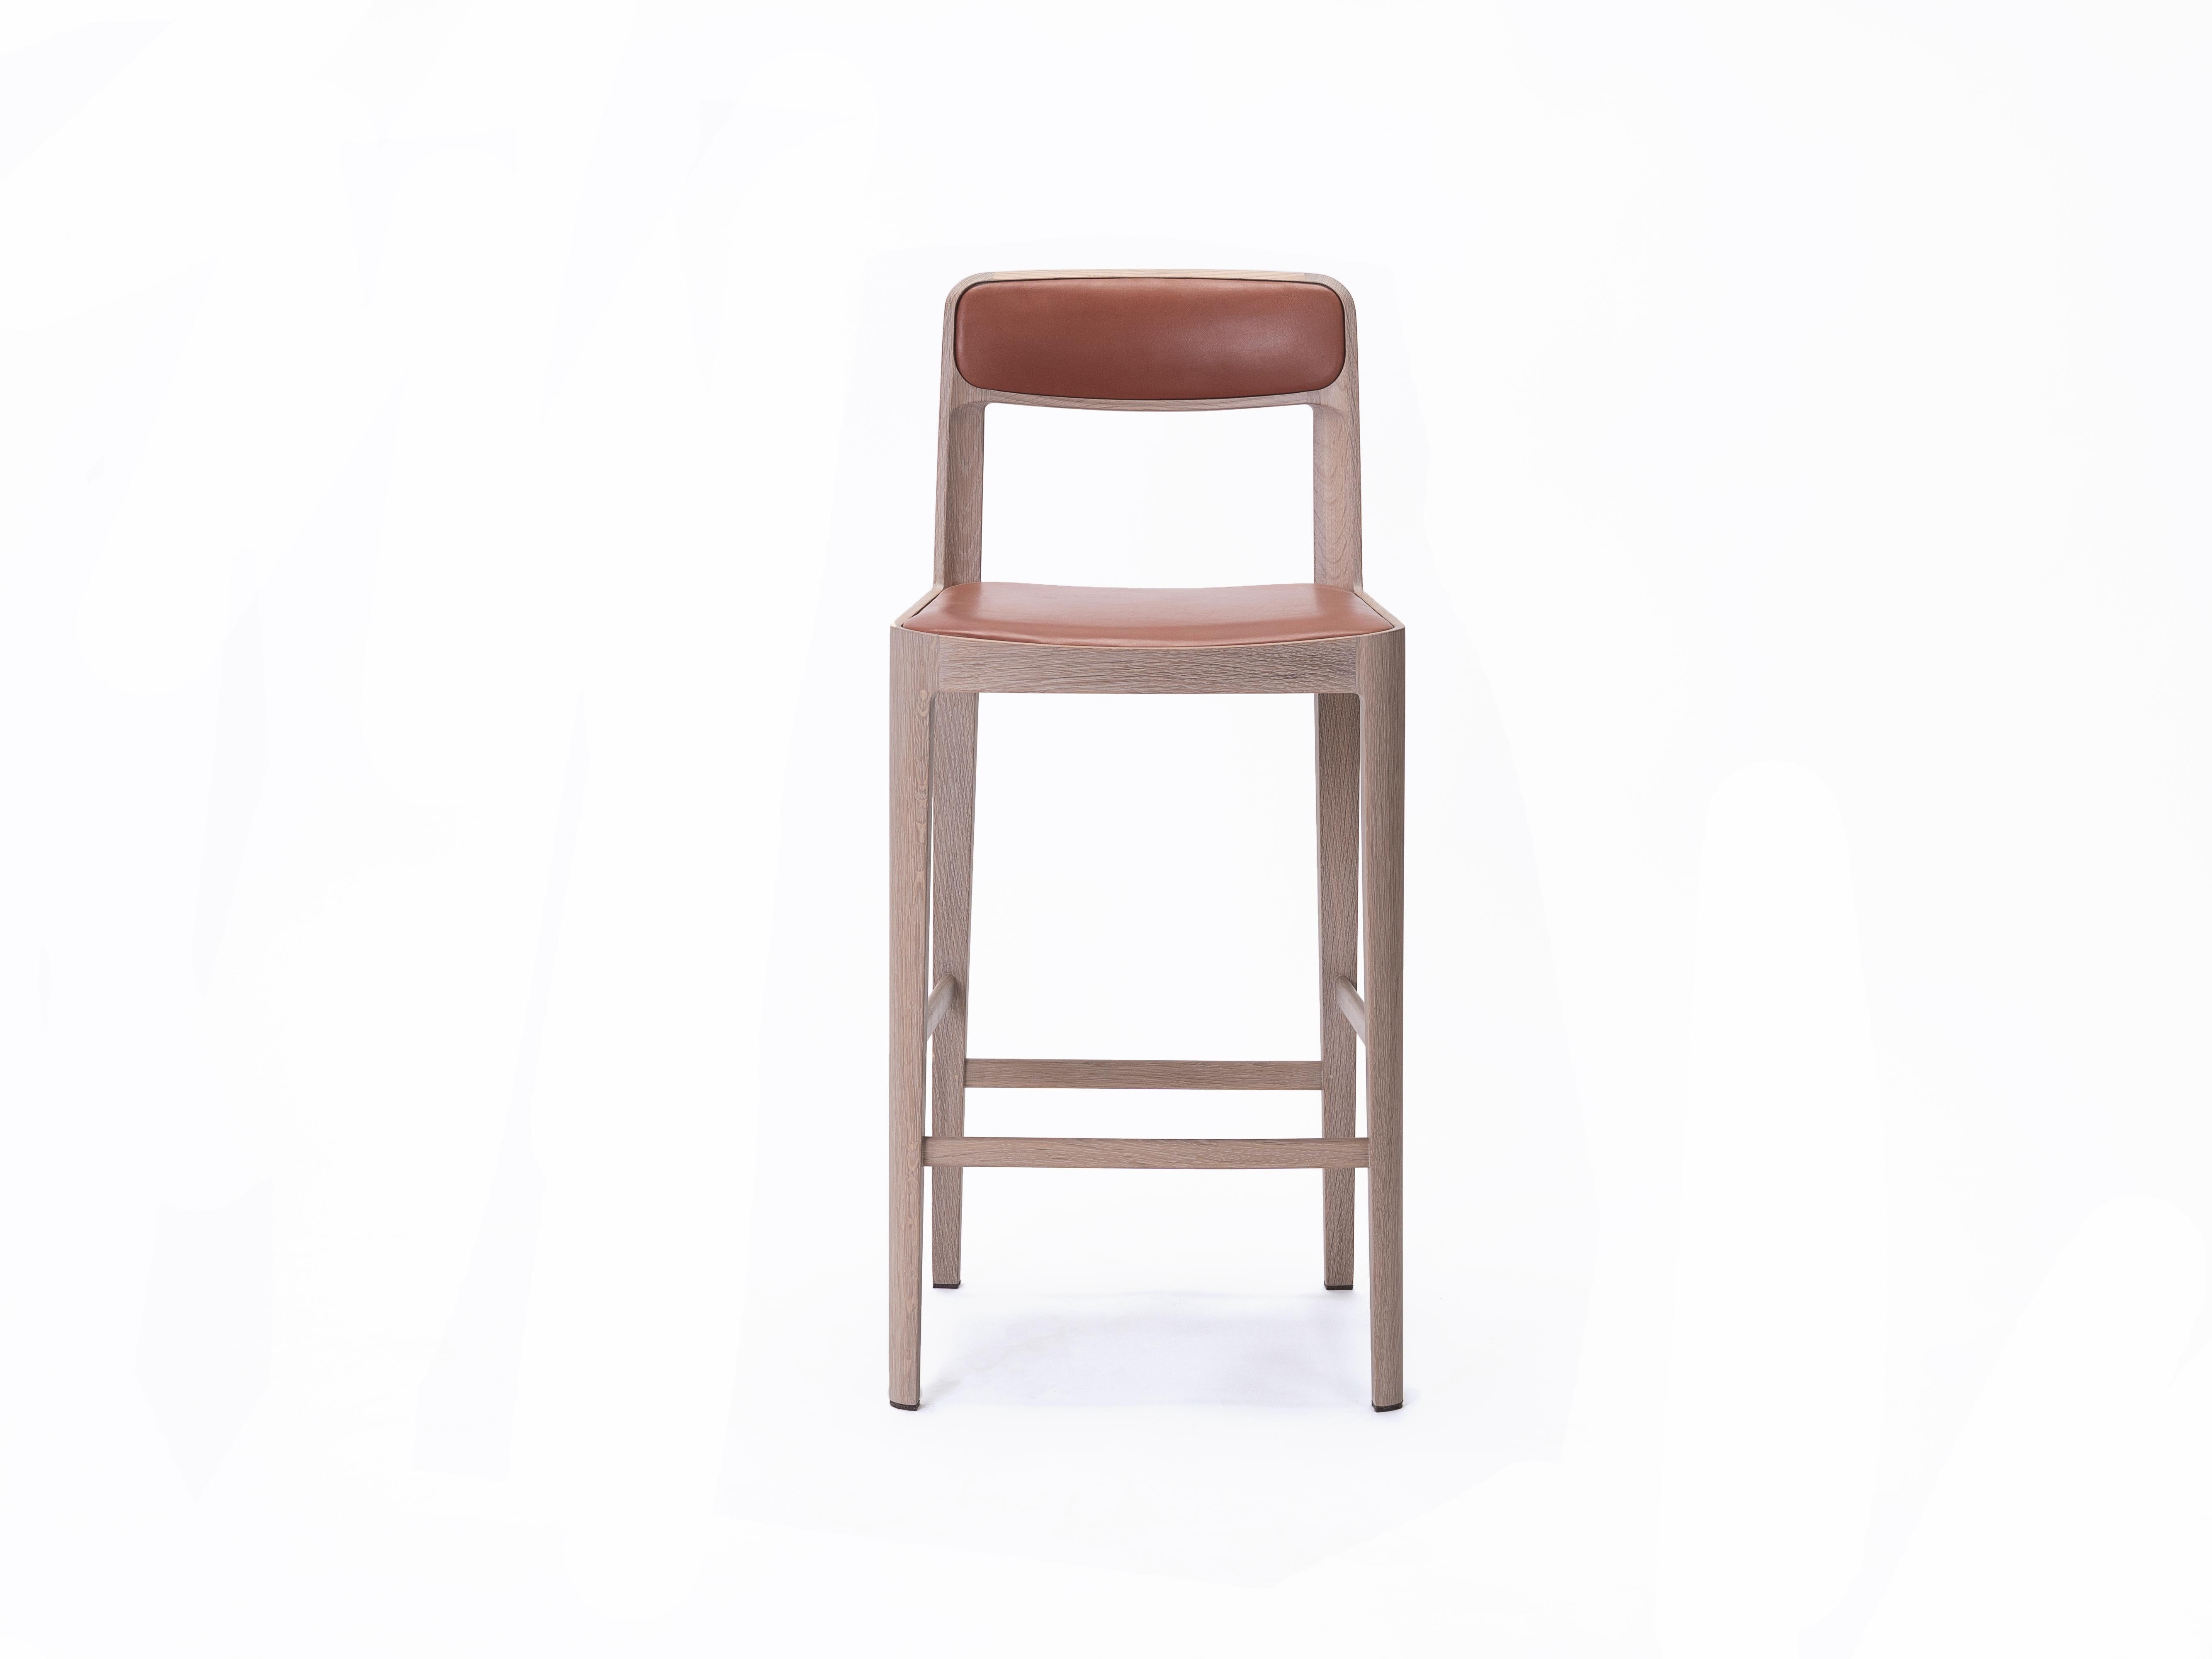 The Linea stool articulates a devotion to lightness and material aptitude. This sinuous structure of elegant proportions is hand carved to create its unique form. Available in both bar and counter height versions.

*Wood and Leather finishes on this